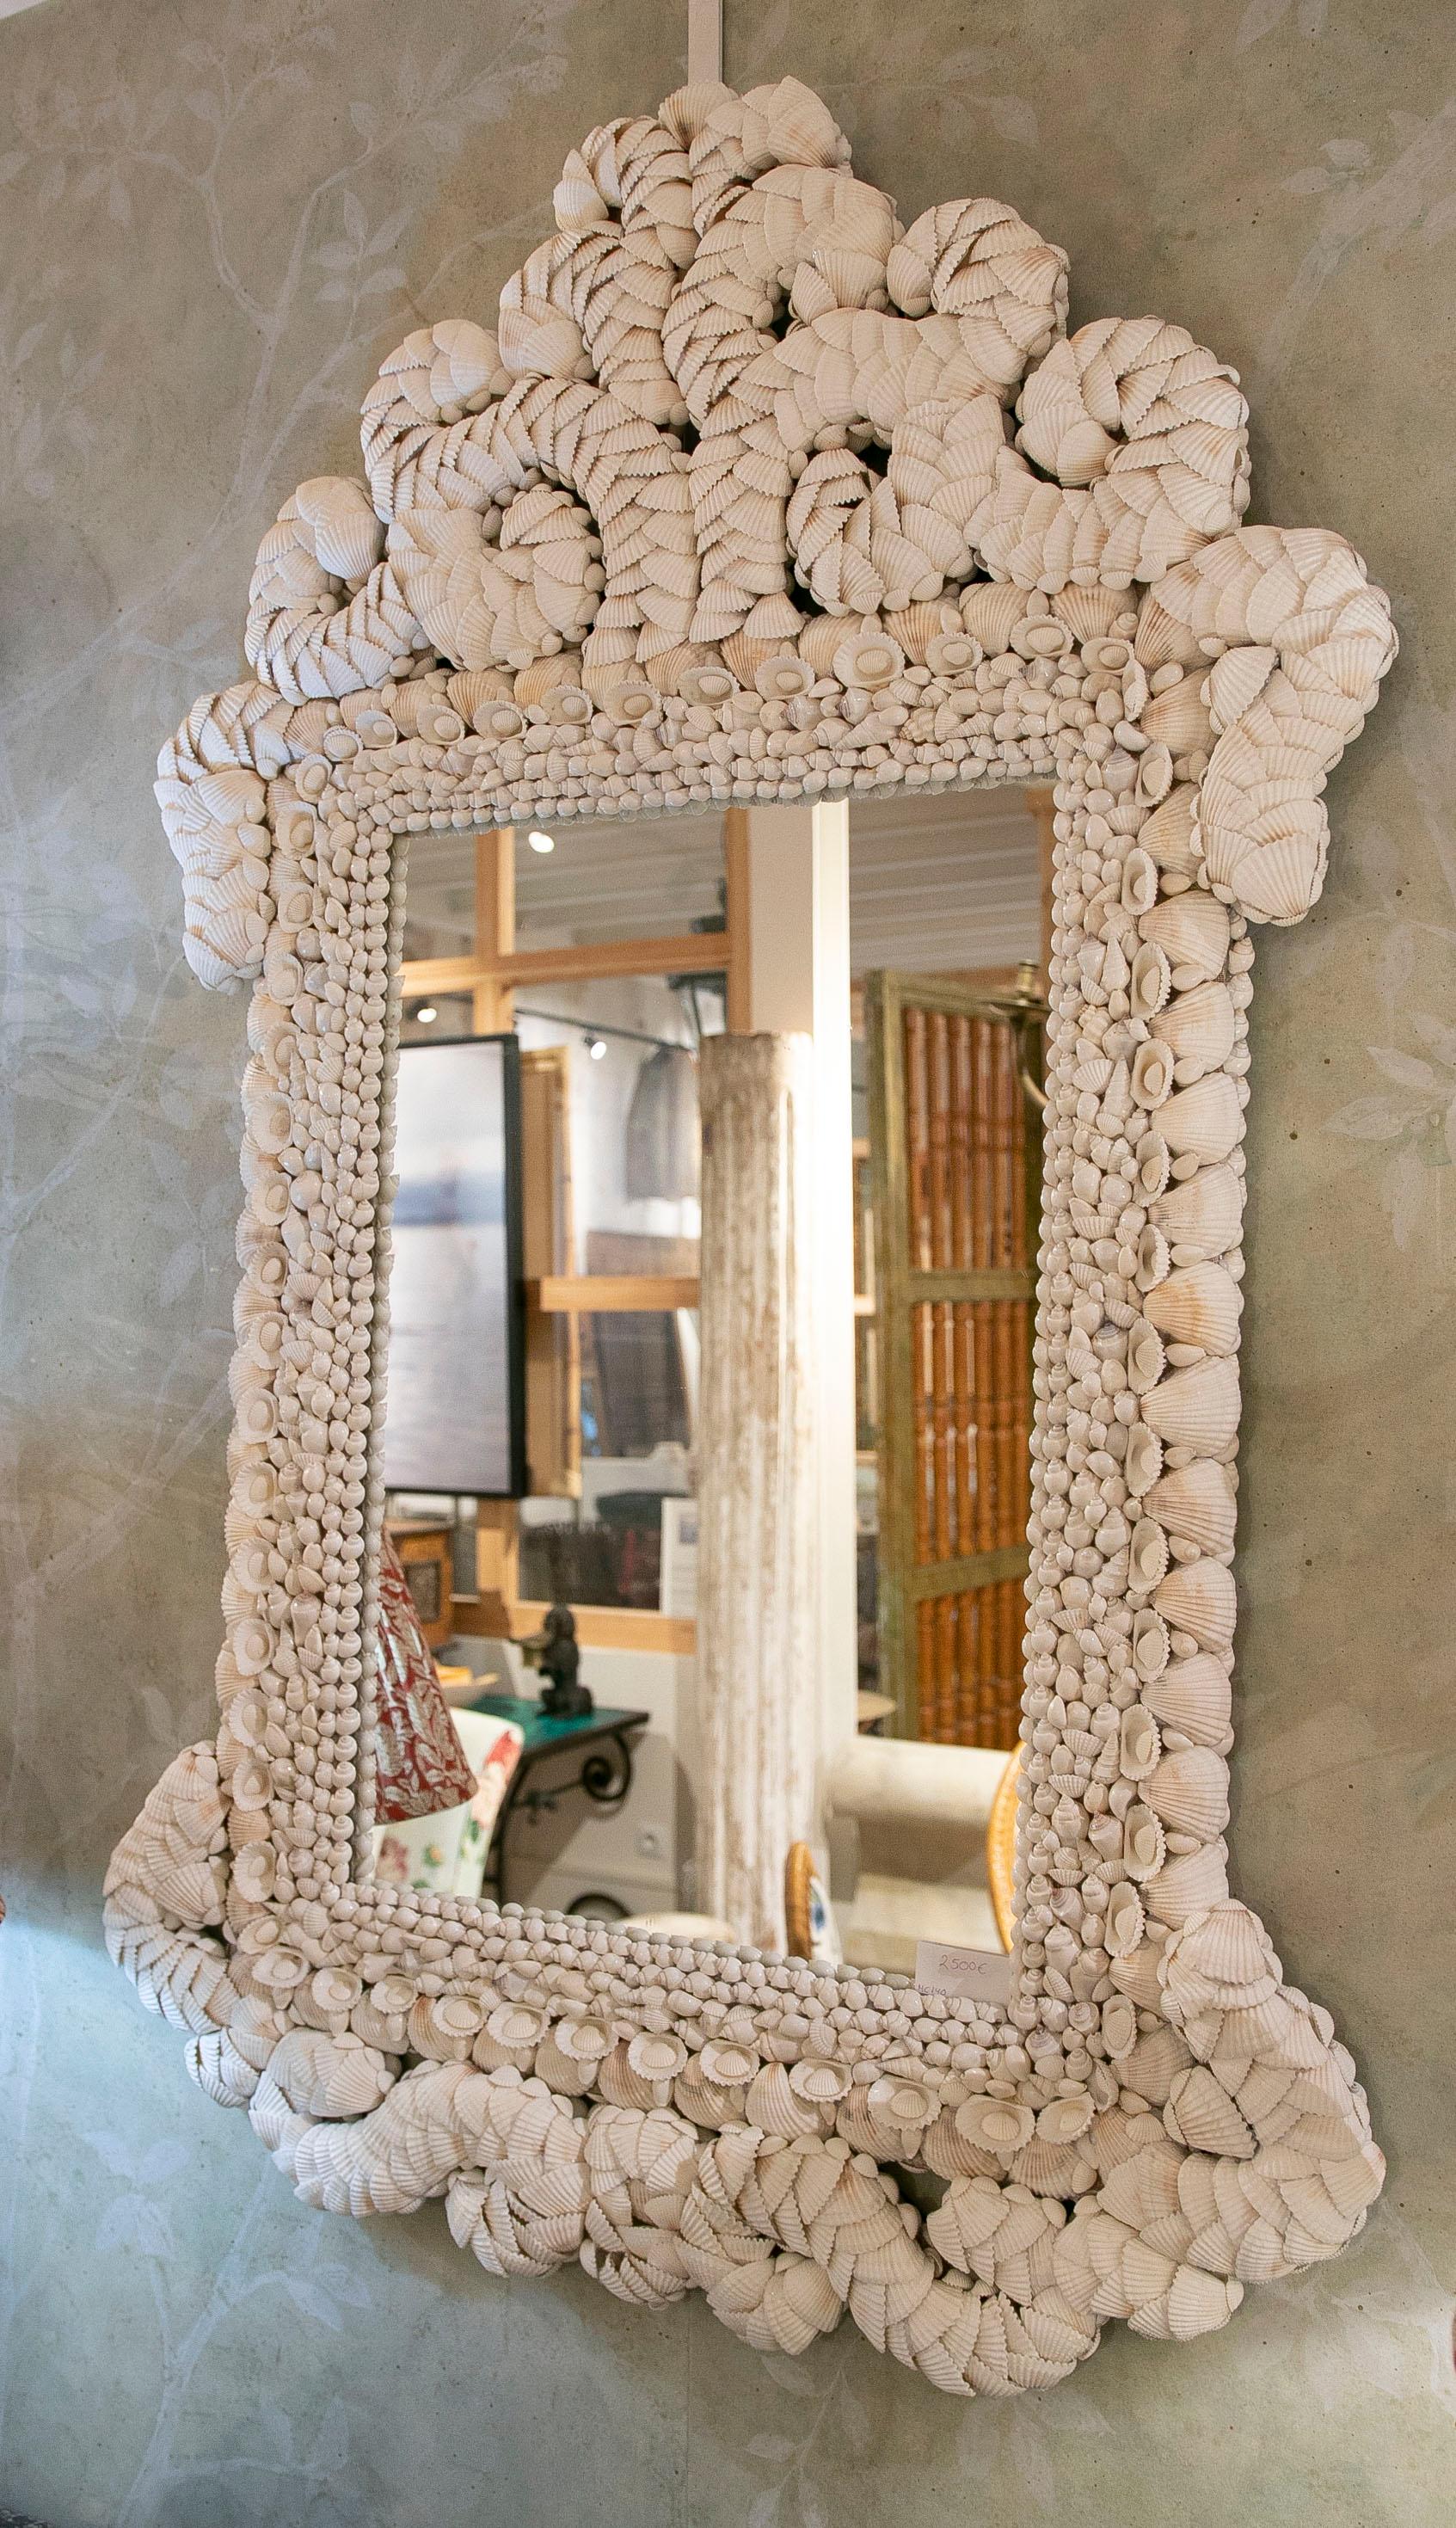 European Wall Mirror with Top Made of Seashells and Conch Shells